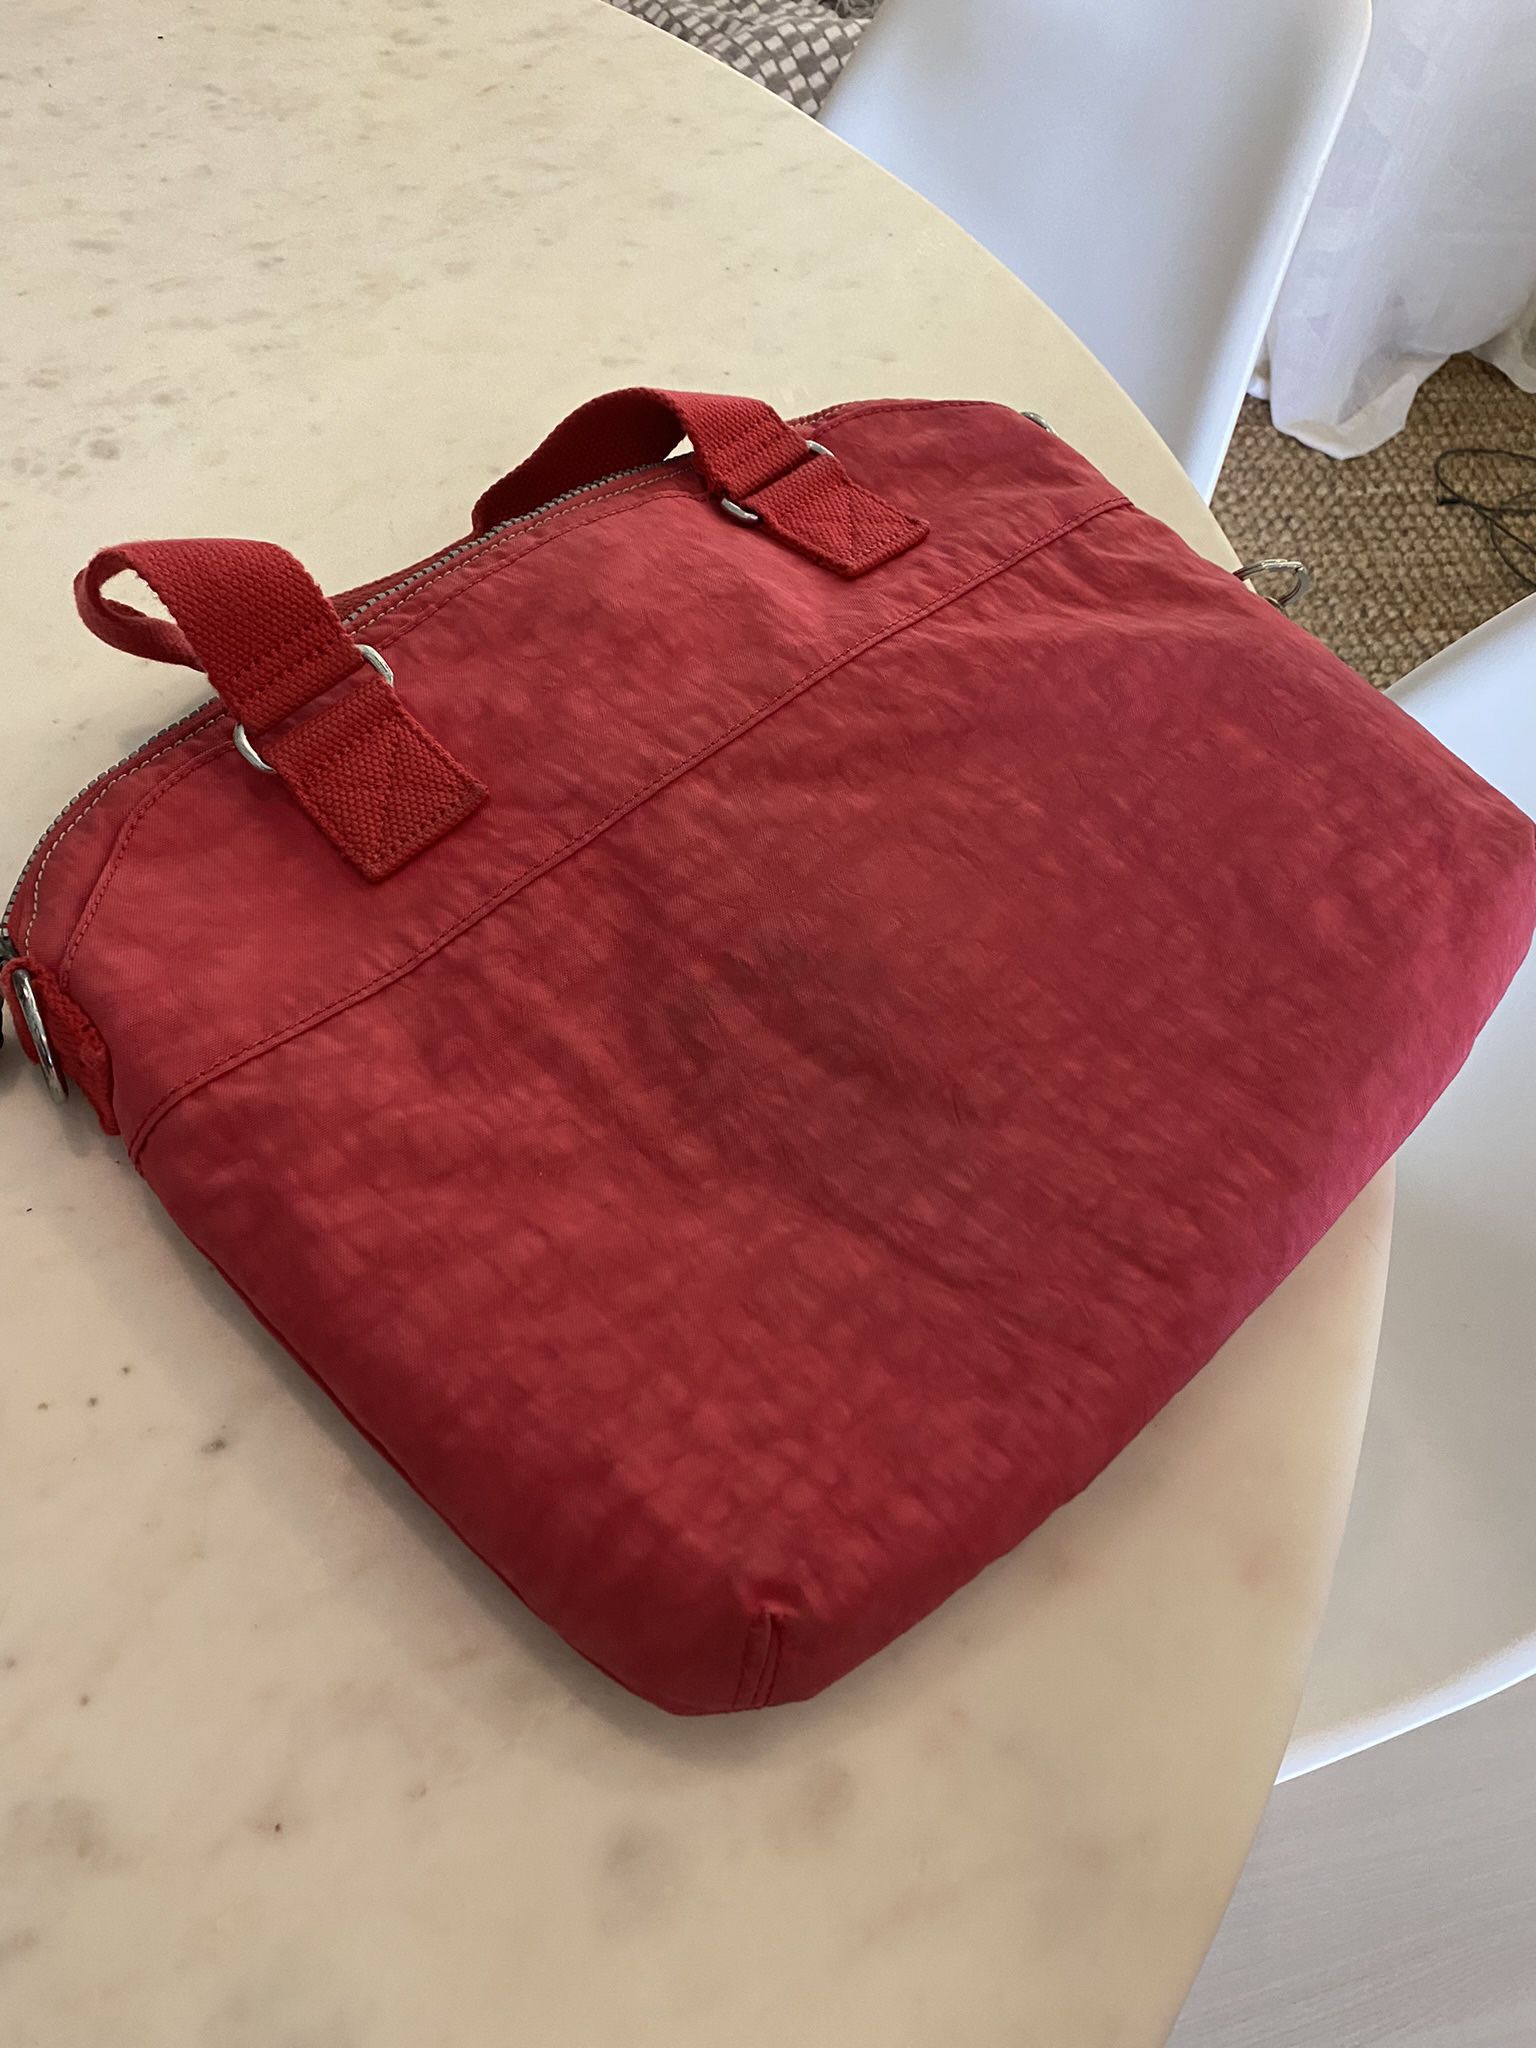 Kipling large Backpack with Laptop protection for Sale in Coral Springs, FL  - OfferUp